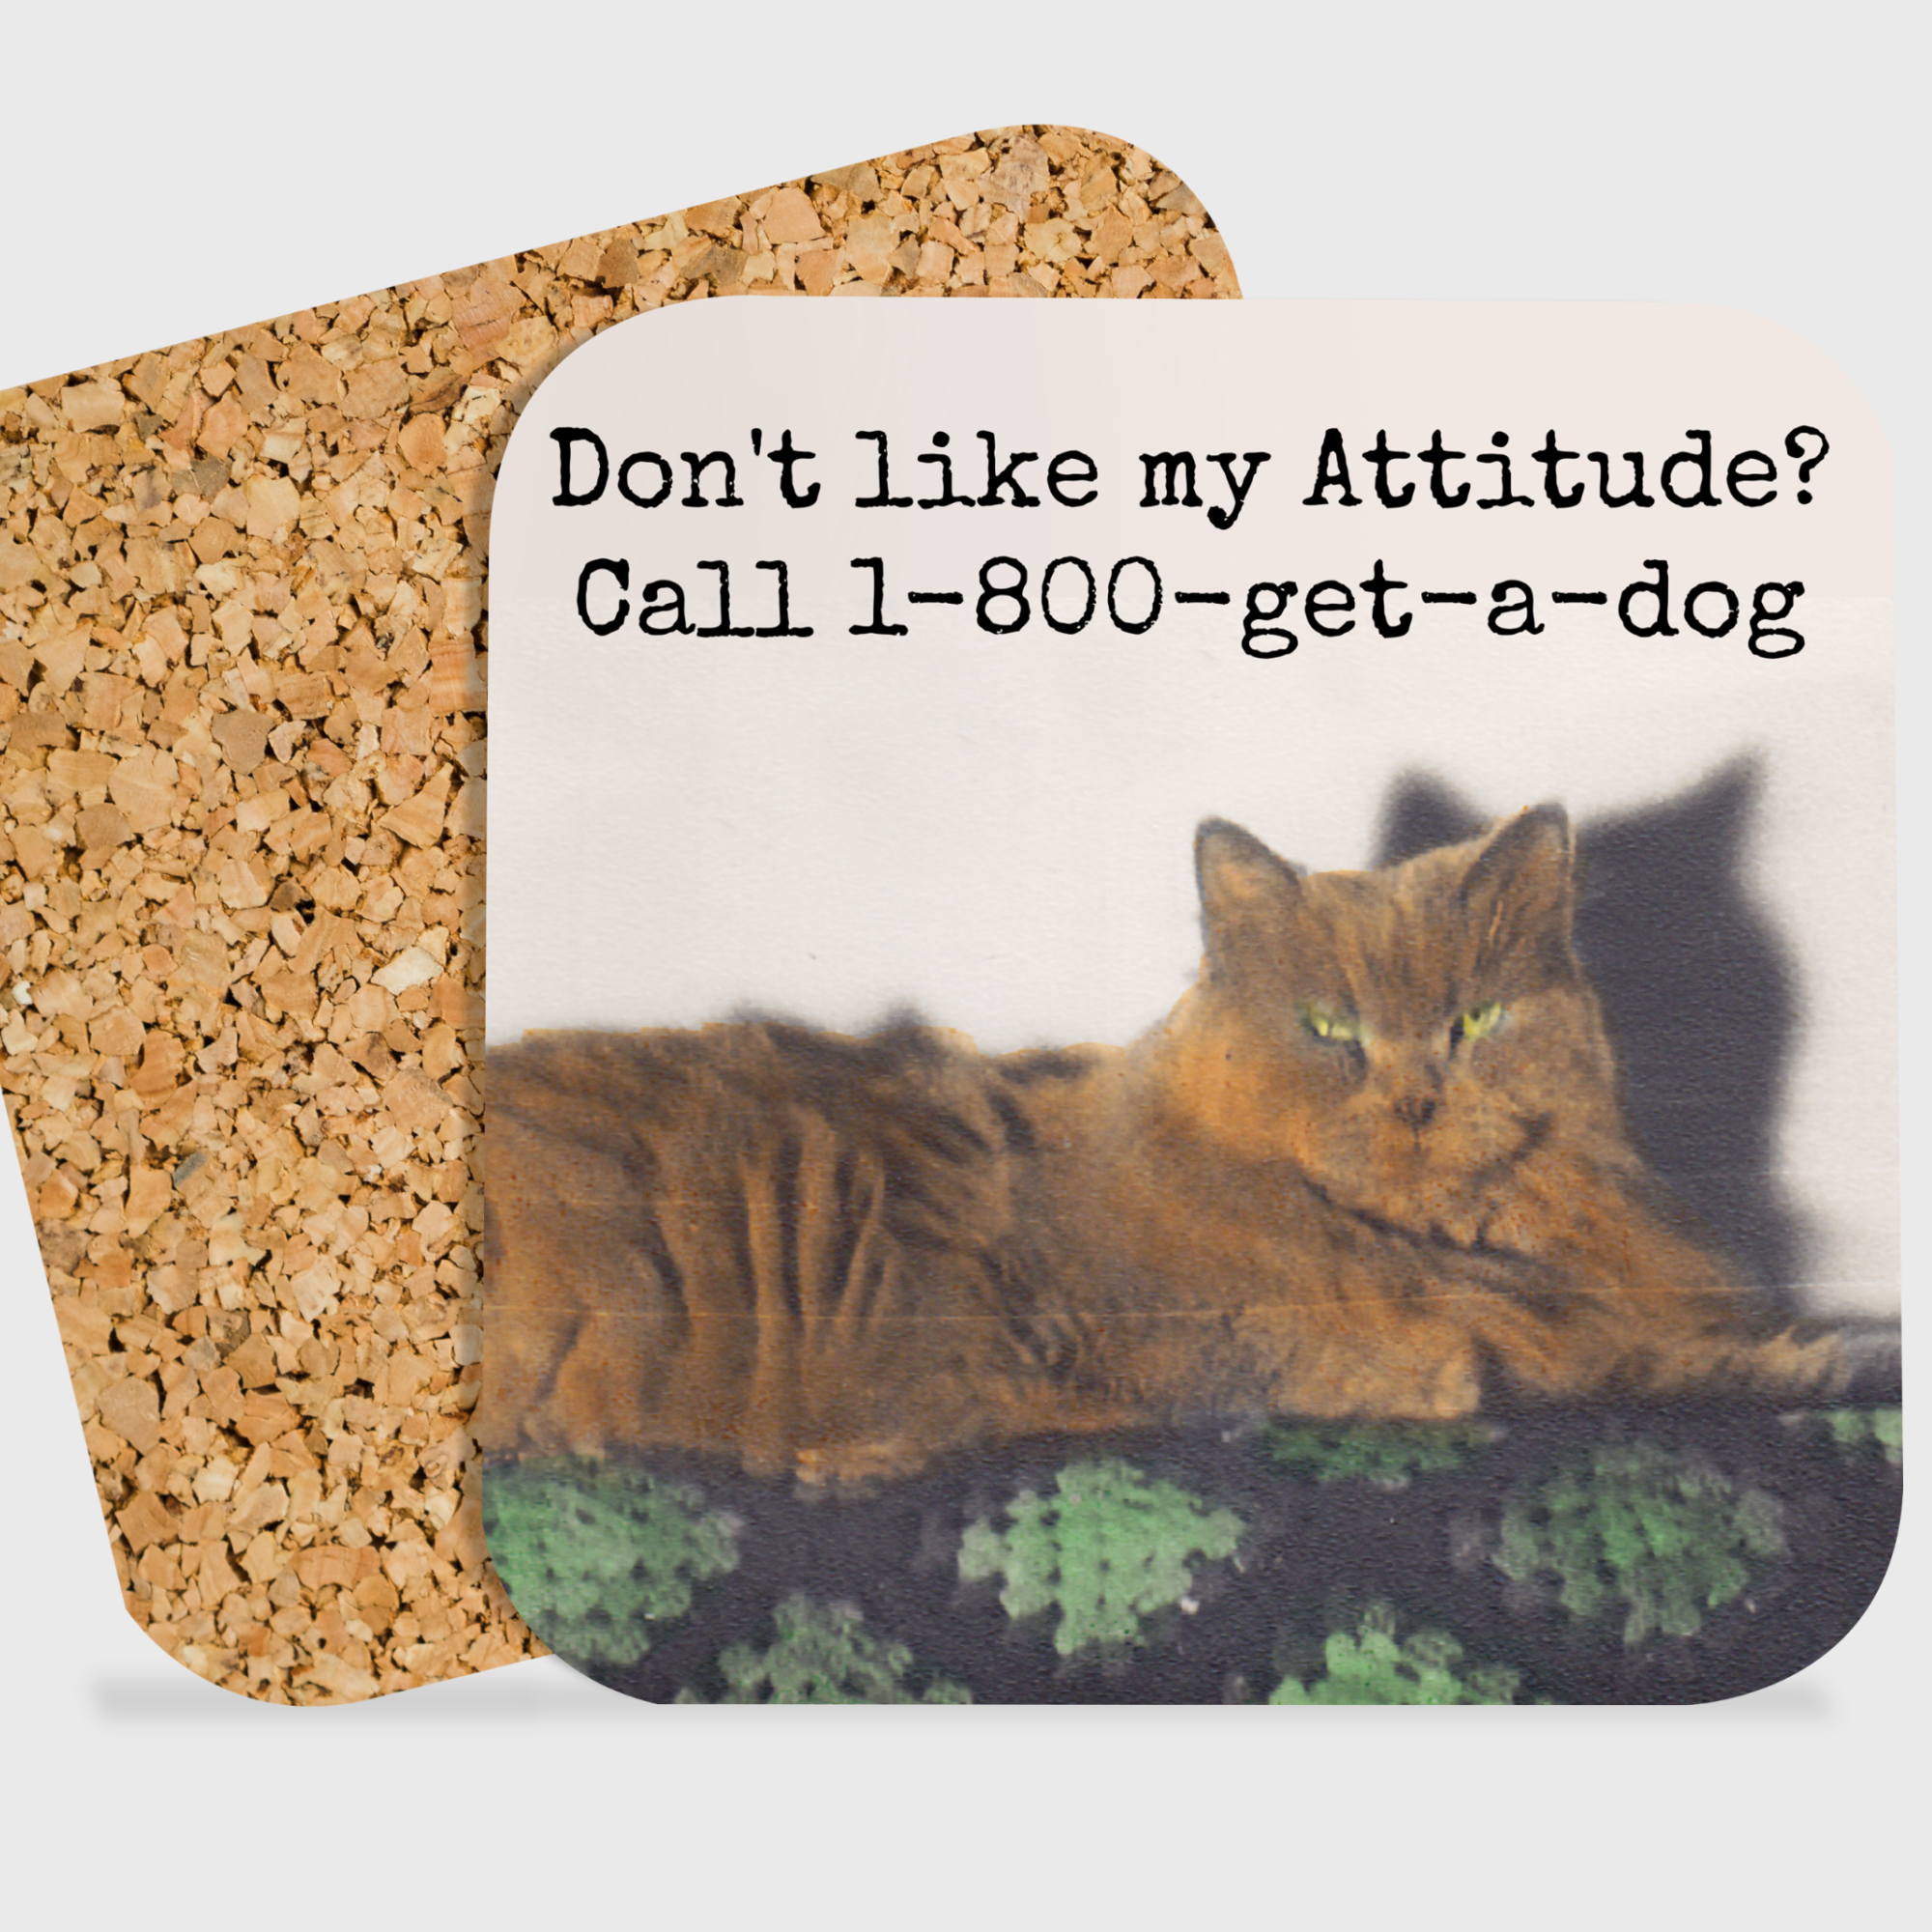 COASTER. Call 1-800-get-a-dog. Funny Vintage Cat Photo Gift.